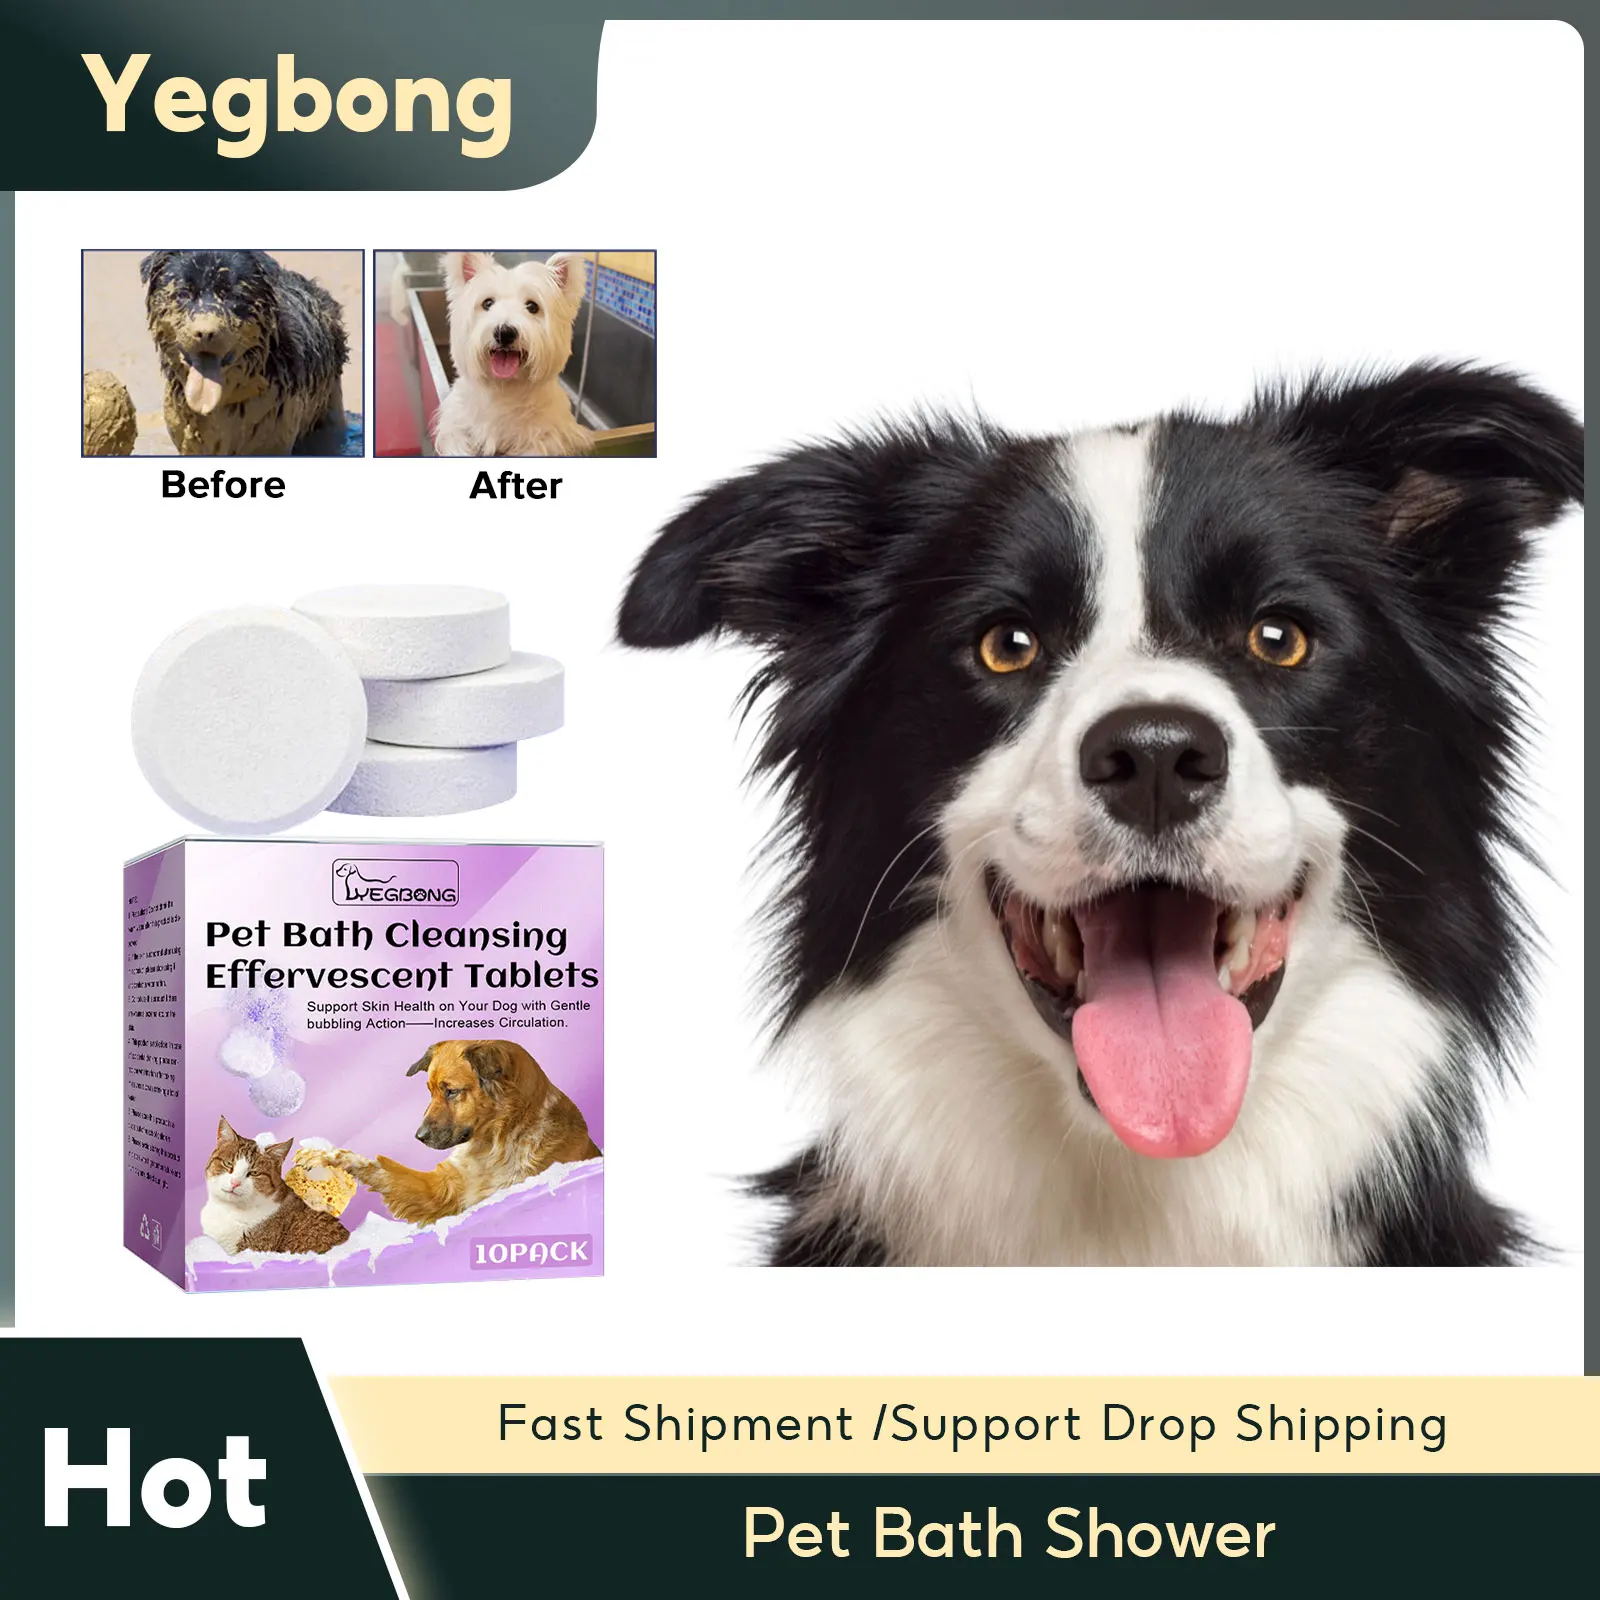 Pet Bath Shower Cleaning Cats Dogs Hair Smoothing Anti Flea Itching Odors - $12.53